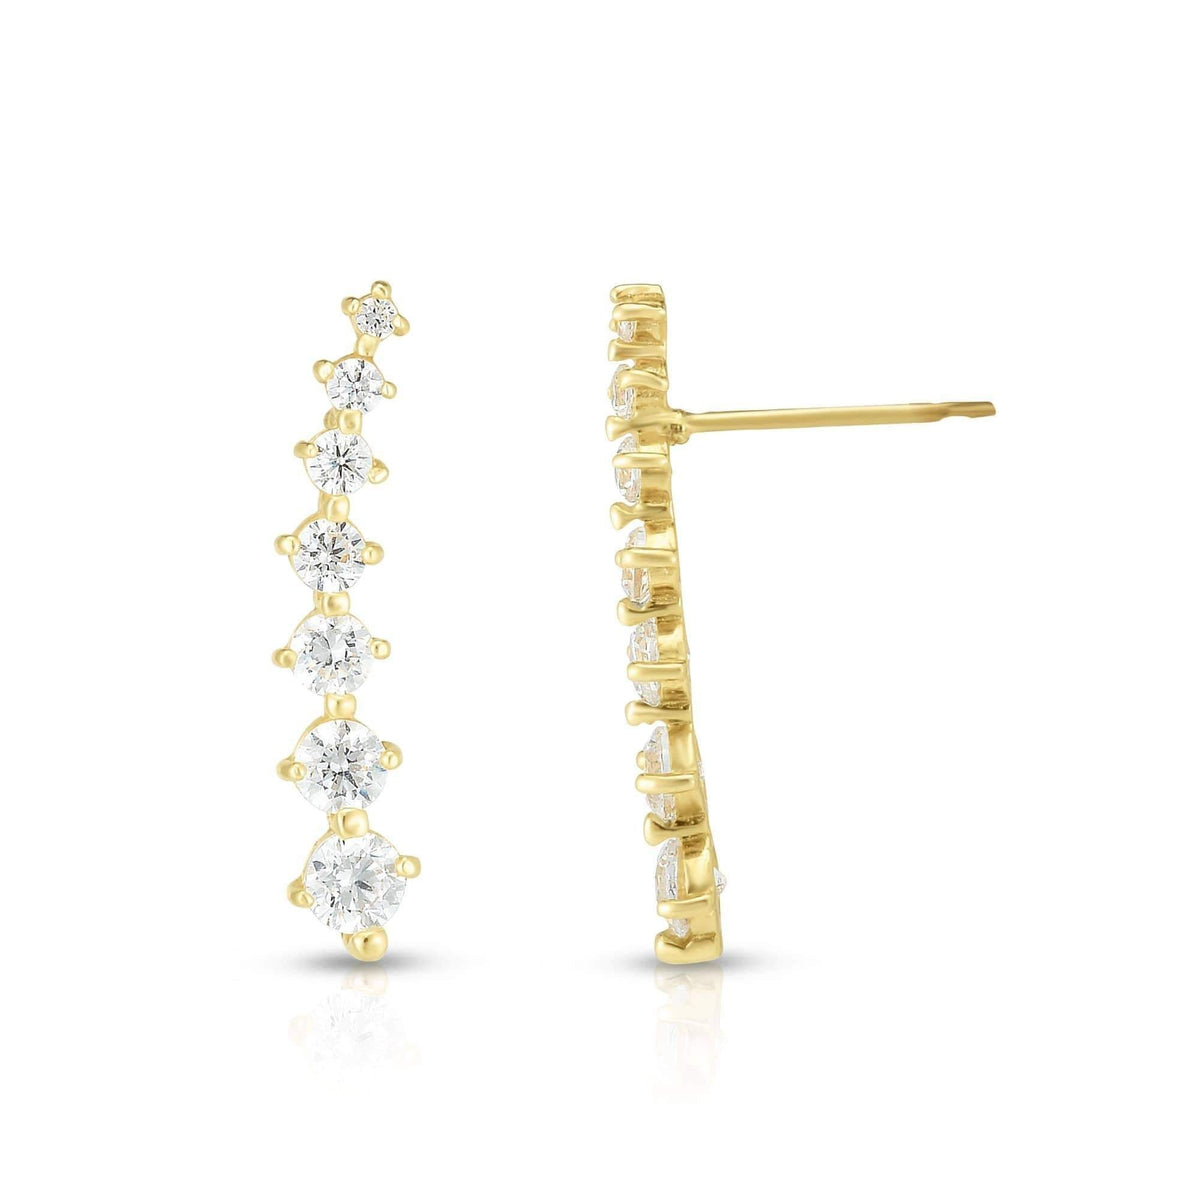 14K Yellow Gold Curved Graduated Crystal Ear Climber Earrings